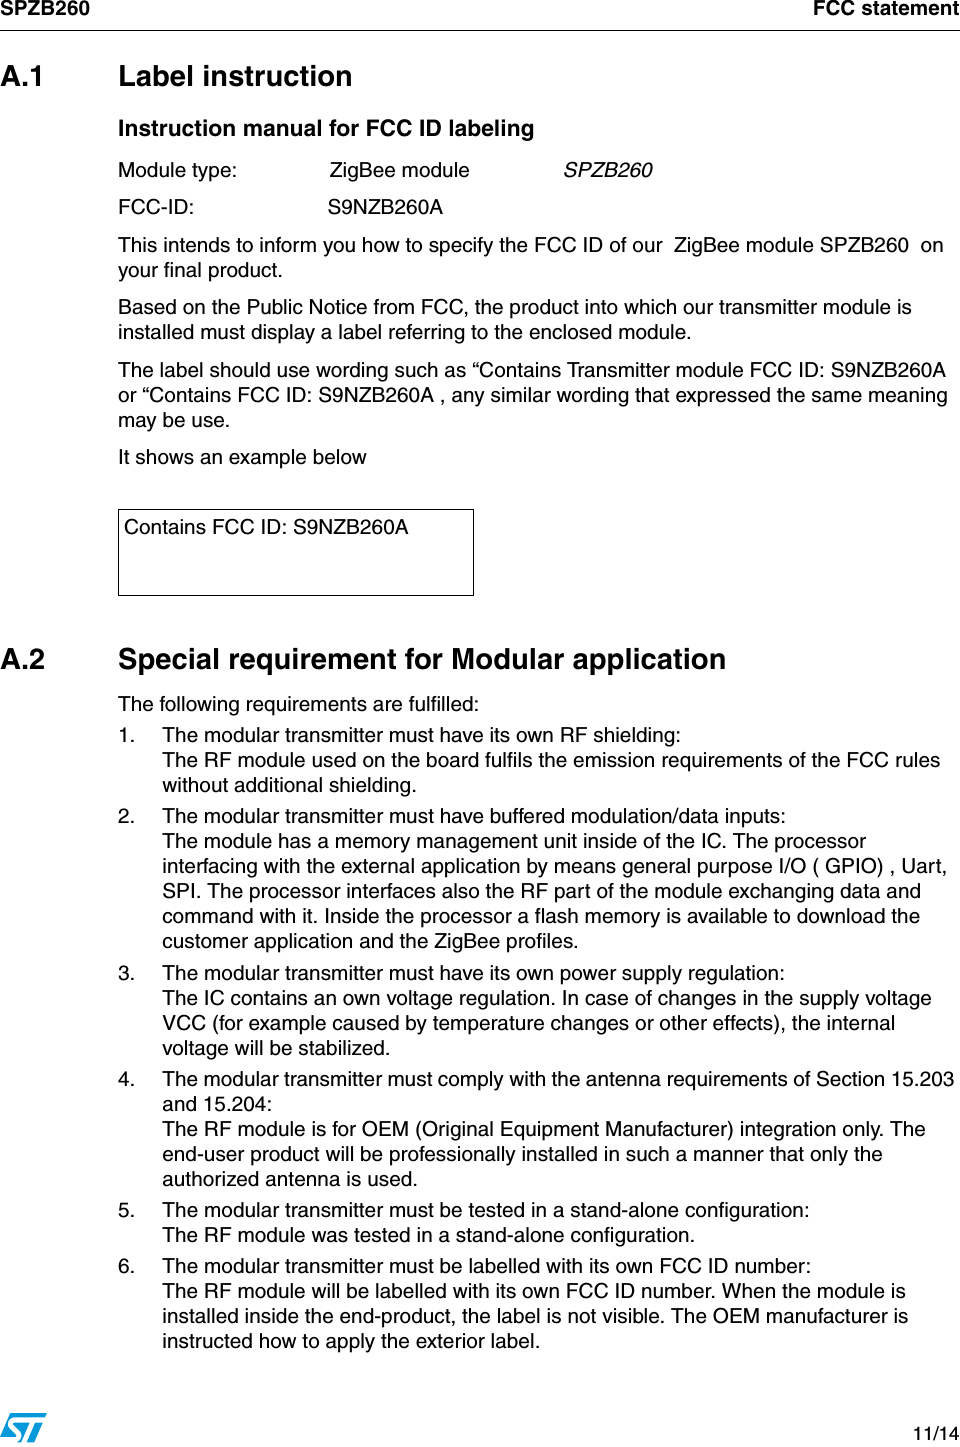 SPZB260 FCC statement   11/14A.1 Label instructionInstruction manual for FCC ID labelingModule type:  ZigBee module  SPZB260FCC-ID:  S9NZB260AThis intends to inform you how to specify the FCC ID of our  ZigBee module SPZB260  on your final product.Based on the Public Notice from FCC, the product into which our transmitter module is installed must display a label referring to the enclosed module. The label should use wording such as “Contains Transmitter module FCC ID: S9NZB260A or “Contains FCC ID: S9NZB260A , any similar wording that expressed the same meaning may be use.It shows an example belowA.2  Special requirement for Modular applicationThe following requirements are fulfilled:1. The modular transmitter must have its own RF shielding:The RF module used on the board fulfils the emission requirements of the FCC rules without additional shielding.2.  The modular transmitter must have buffered modulation/data inputs:The module has a memory management unit inside of the IC. The processor interfacing with the external application by means general purpose I/O ( GPIO) , Uart,  SPI. The processor interfaces also the RF part of the module exchanging data and command with it. Inside the processor a flash memory is available to download the customer application and the ZigBee profiles.3.  The modular transmitter must have its own power supply regulation:The IC contains an own voltage regulation. In case of changes in the supply voltage VCC (for example caused by temperature changes or other effects), the internal voltage will be stabilized.4.  The modular transmitter must comply with the antenna requirements of Section 15.203 and 15.204: The RF module is for OEM (Original Equipment Manufacturer) integration only. The end-user product will be professionally installed in such a manner that only the authorized antenna is used.5.  The modular transmitter must be tested in a stand-alone configuration:The RF module was tested in a stand-alone configuration. 6.  The modular transmitter must be labelled with its own FCC ID number:The RF module will be labelled with its own FCC ID number. When the module is installed inside the end-product, the label is not visible. The OEM manufacturer is instructed how to apply the exterior label. Contains FCC ID: S9NZB260A